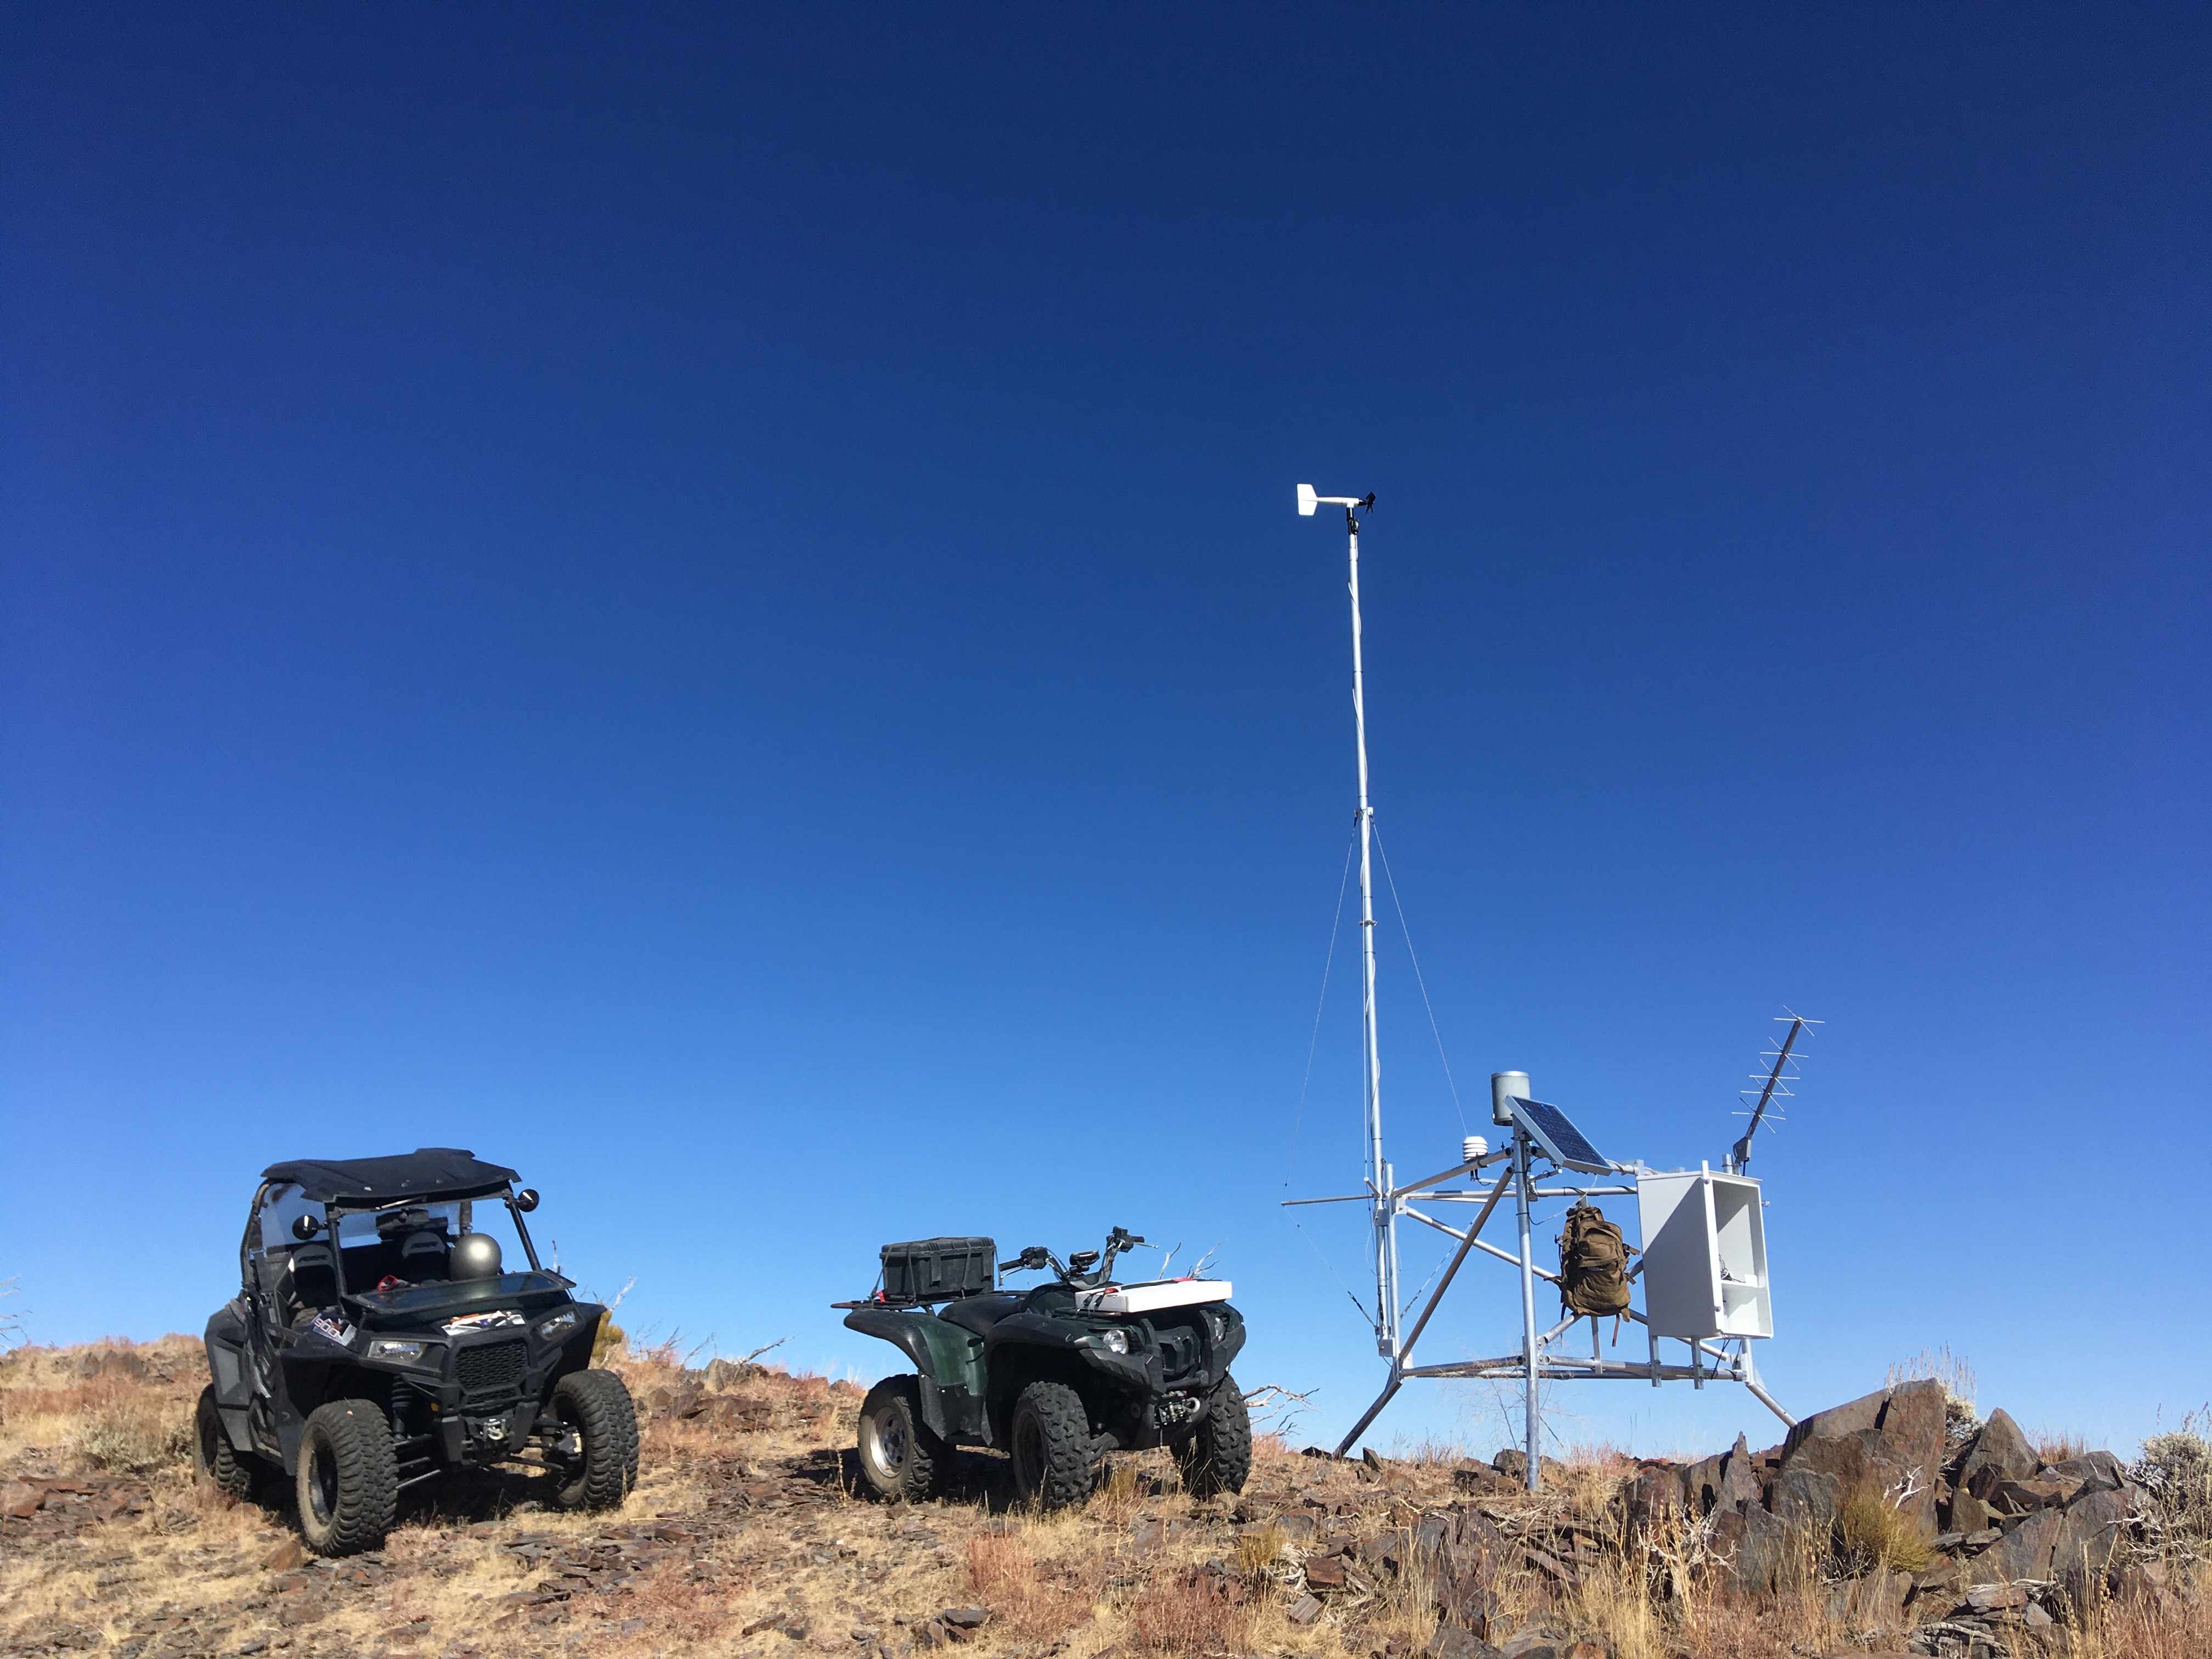 Remote Automatic Weather Stations (RAWS)